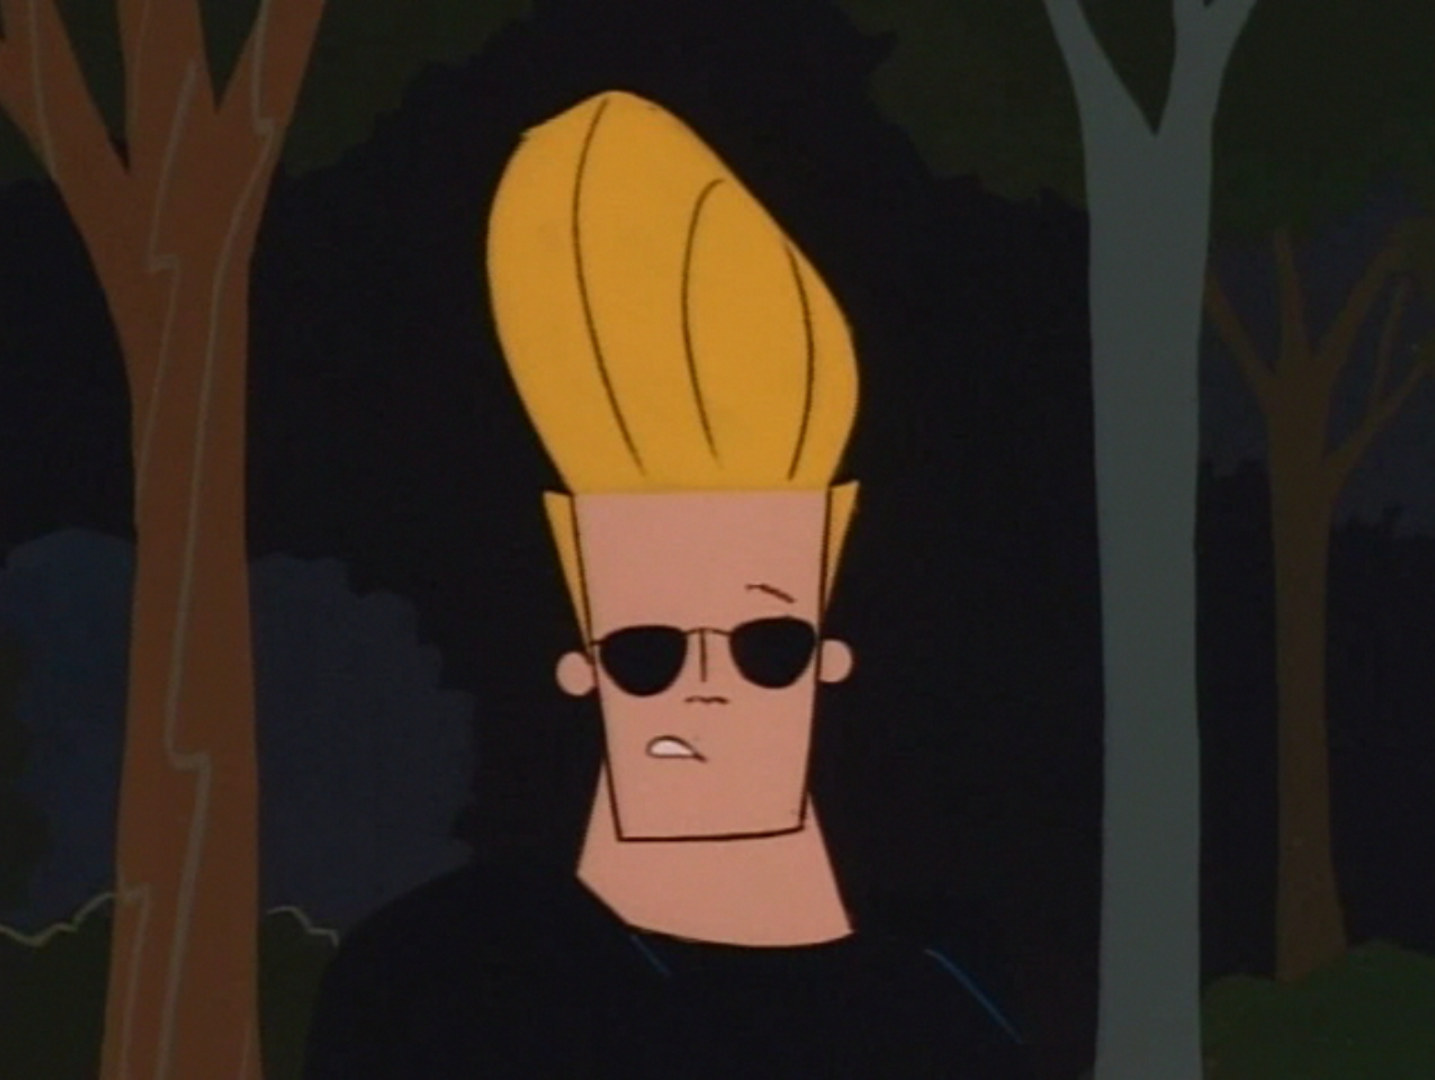 https://static.wikia.nocookie.net/scoobydoo/images/9/9a/Johnny_Bravo.png/revision/latest?cb=20160201170538